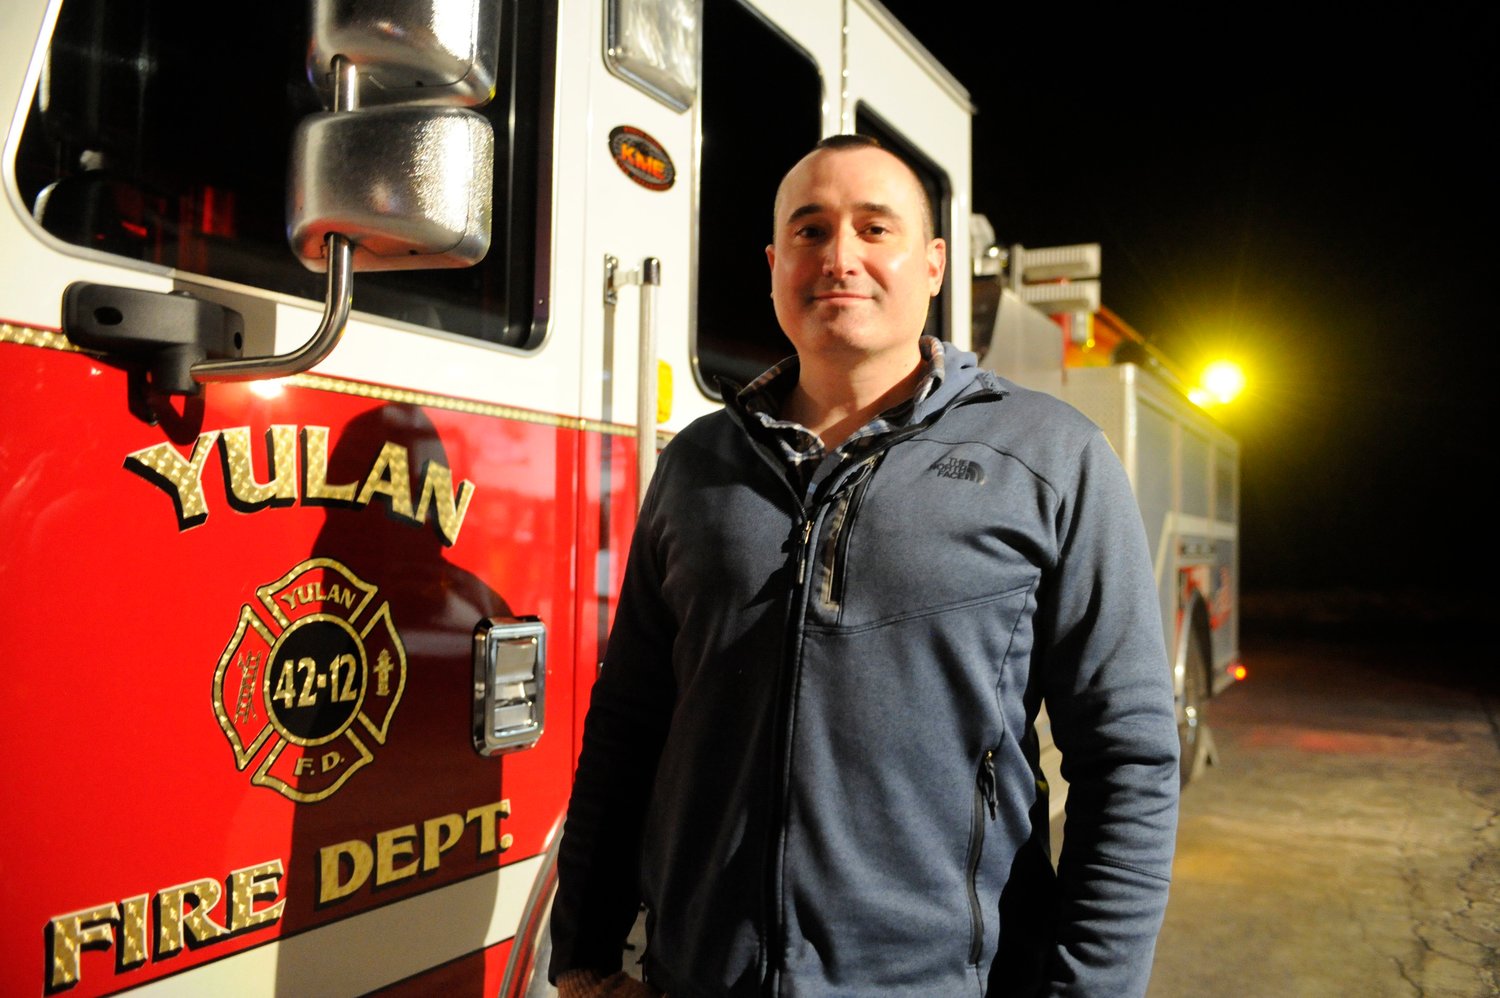 Phil Deyermond, chief of the Yulan Volunteer Fire Department, follows a family tradition of service; both his father and grandfather were firefighters.